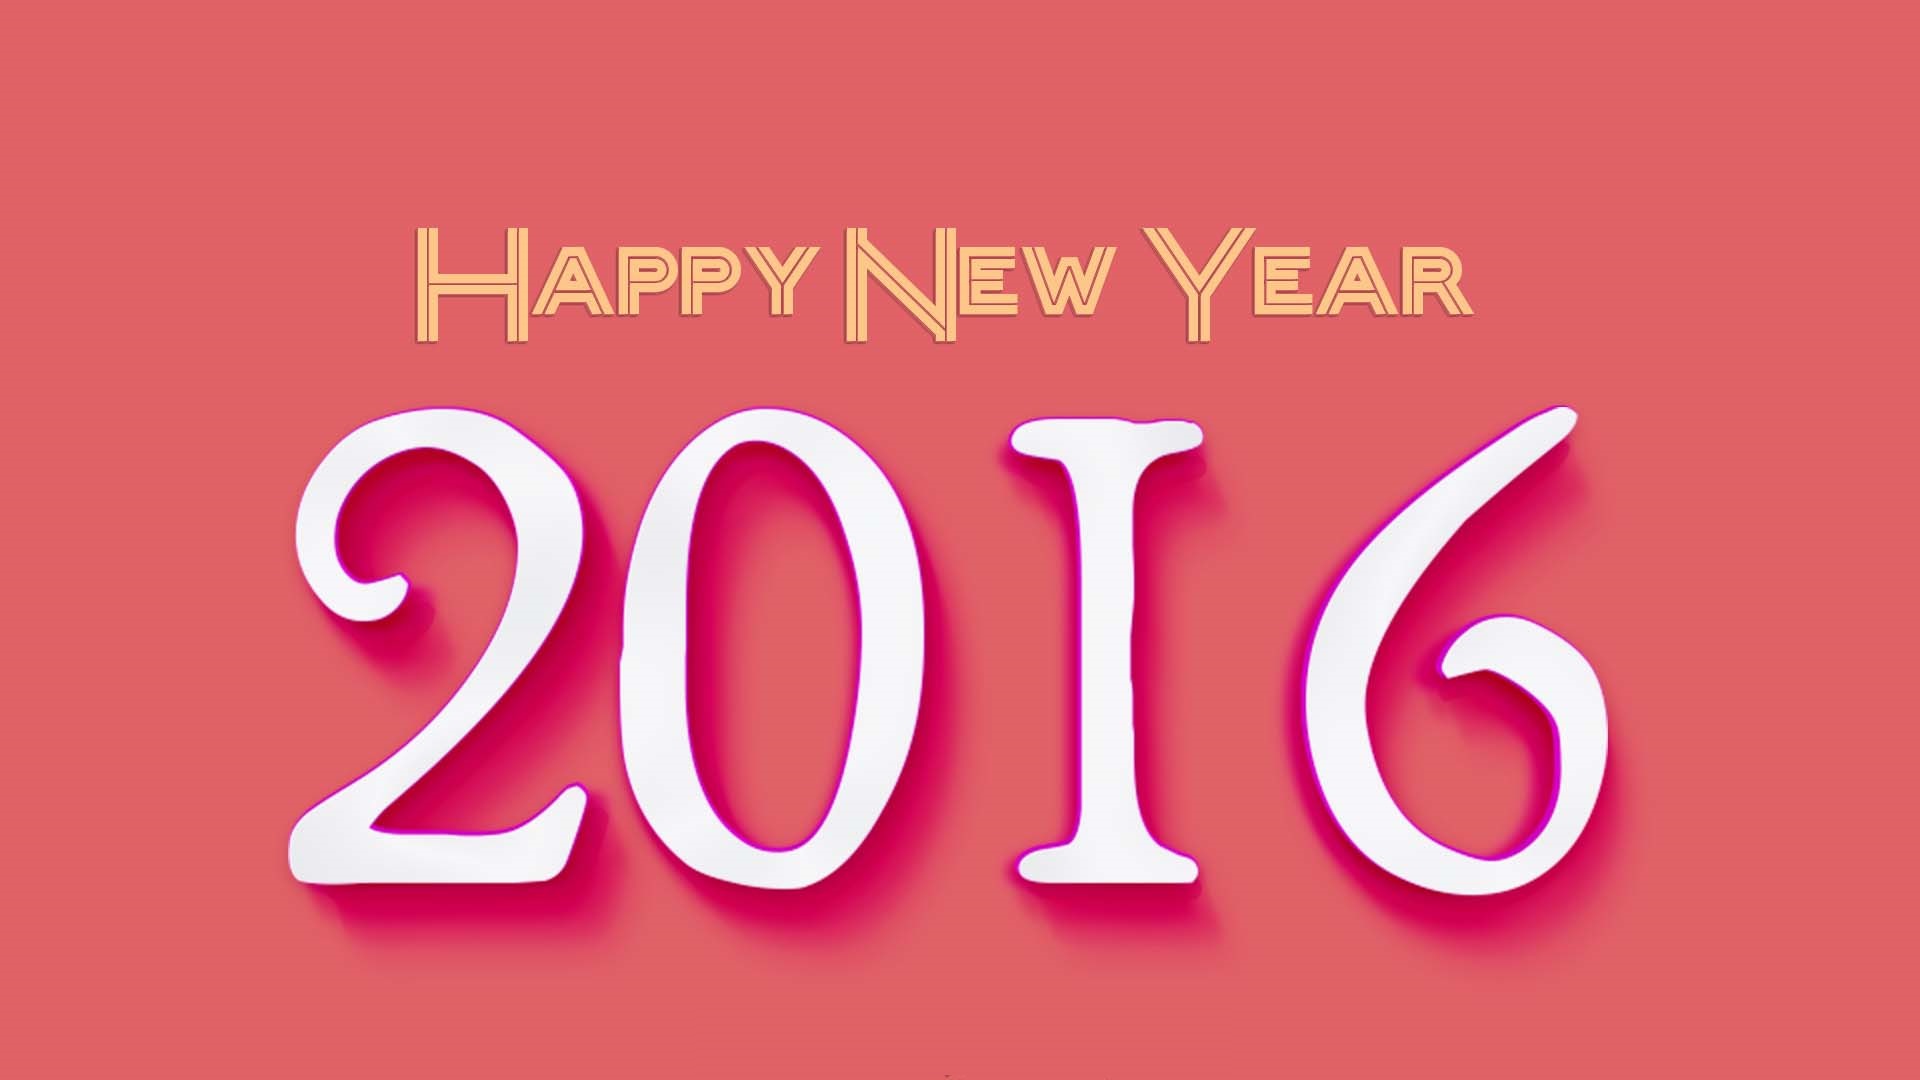 Happy New Year 2016 Hd Wallpapers Images Free Download Science And